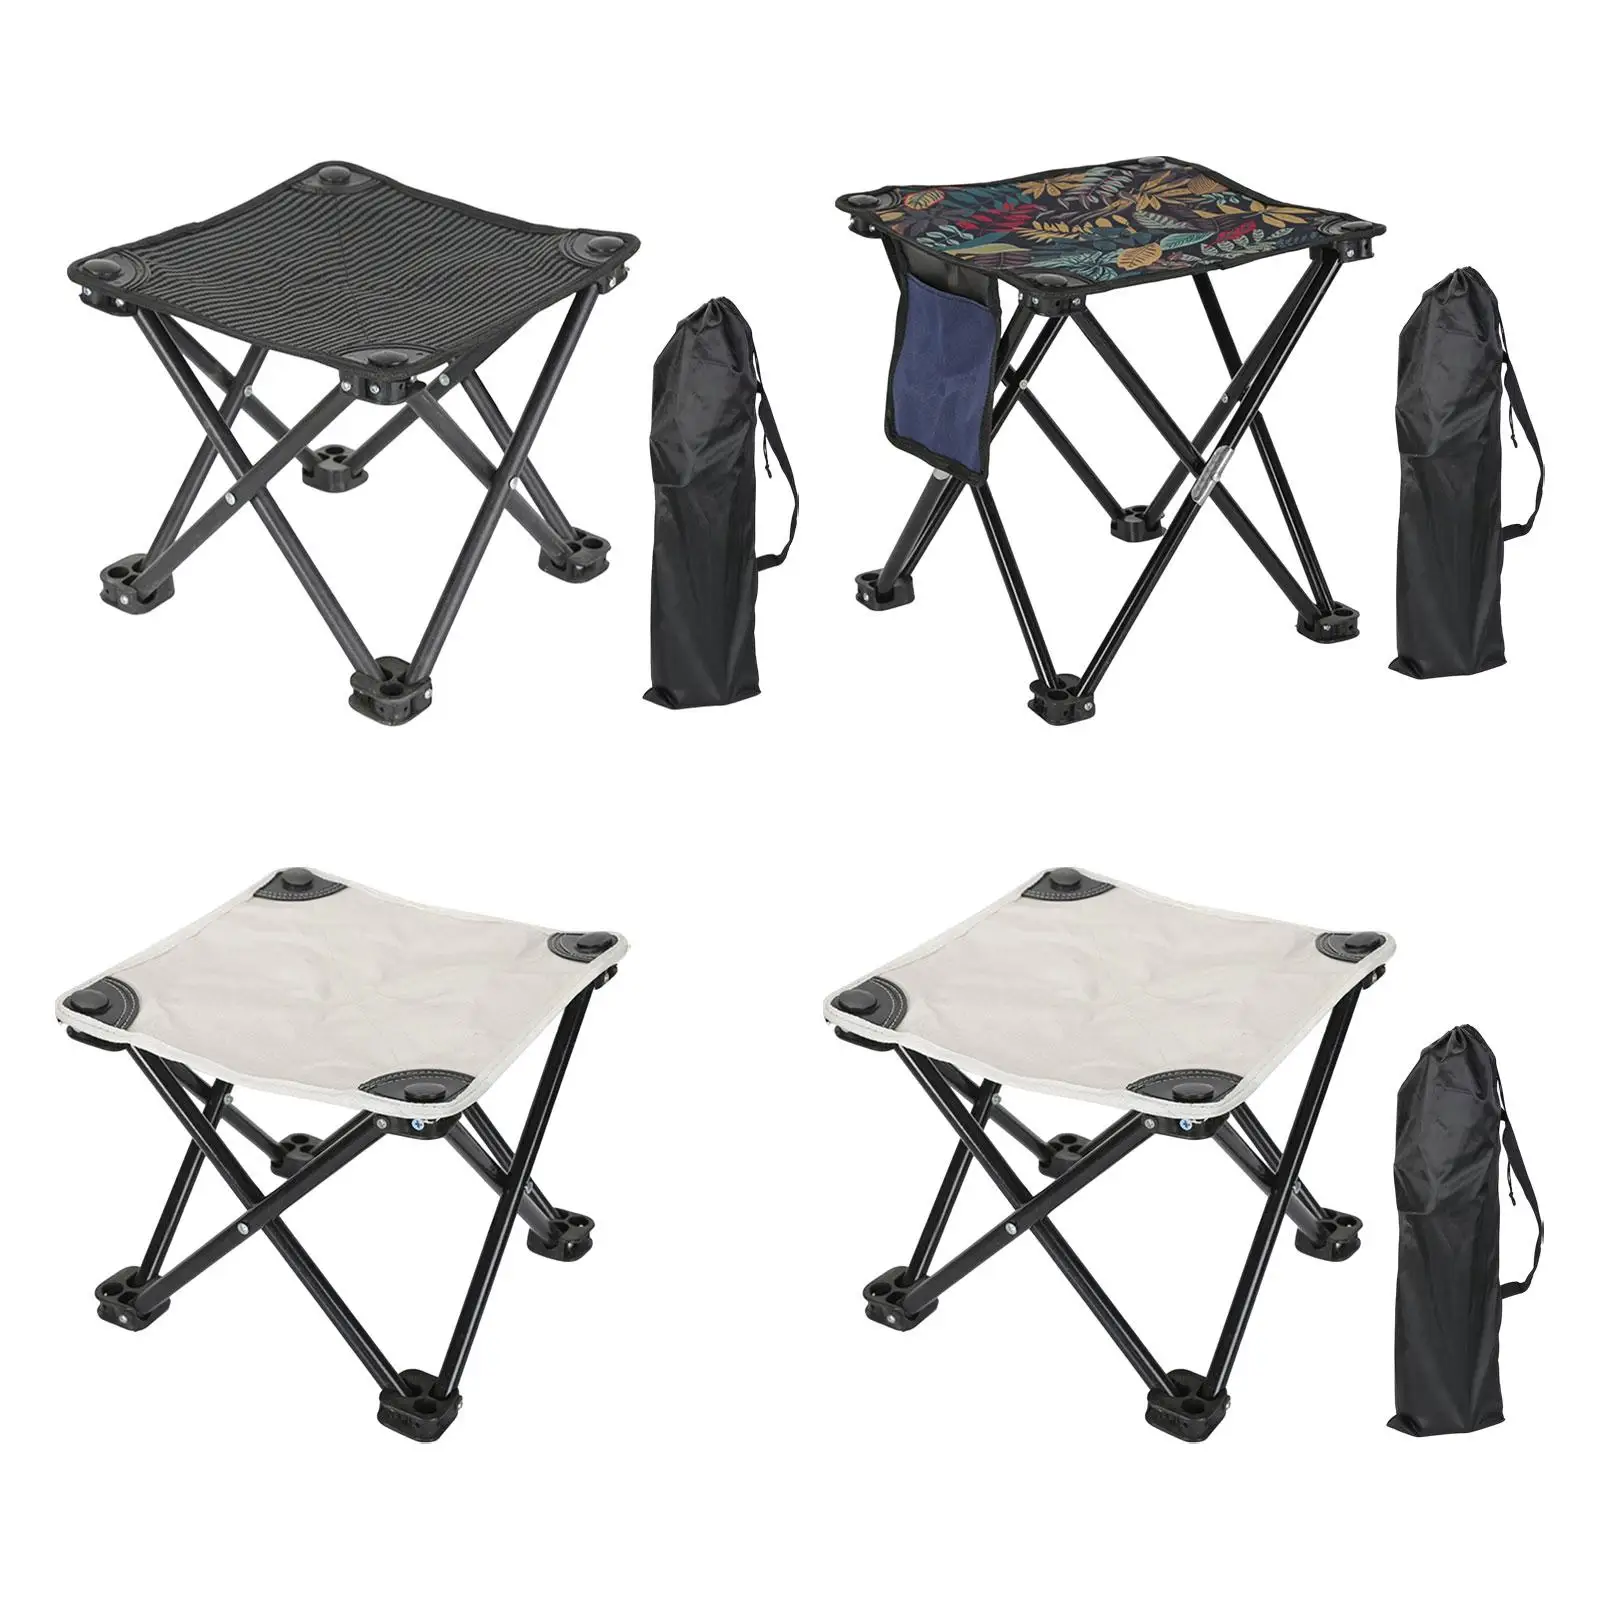 Portable Folding Stool Wear Resistant Small Chair for Adults Foldable Camping Stool for Outdoor BBQ Beach Traveling Backpacking